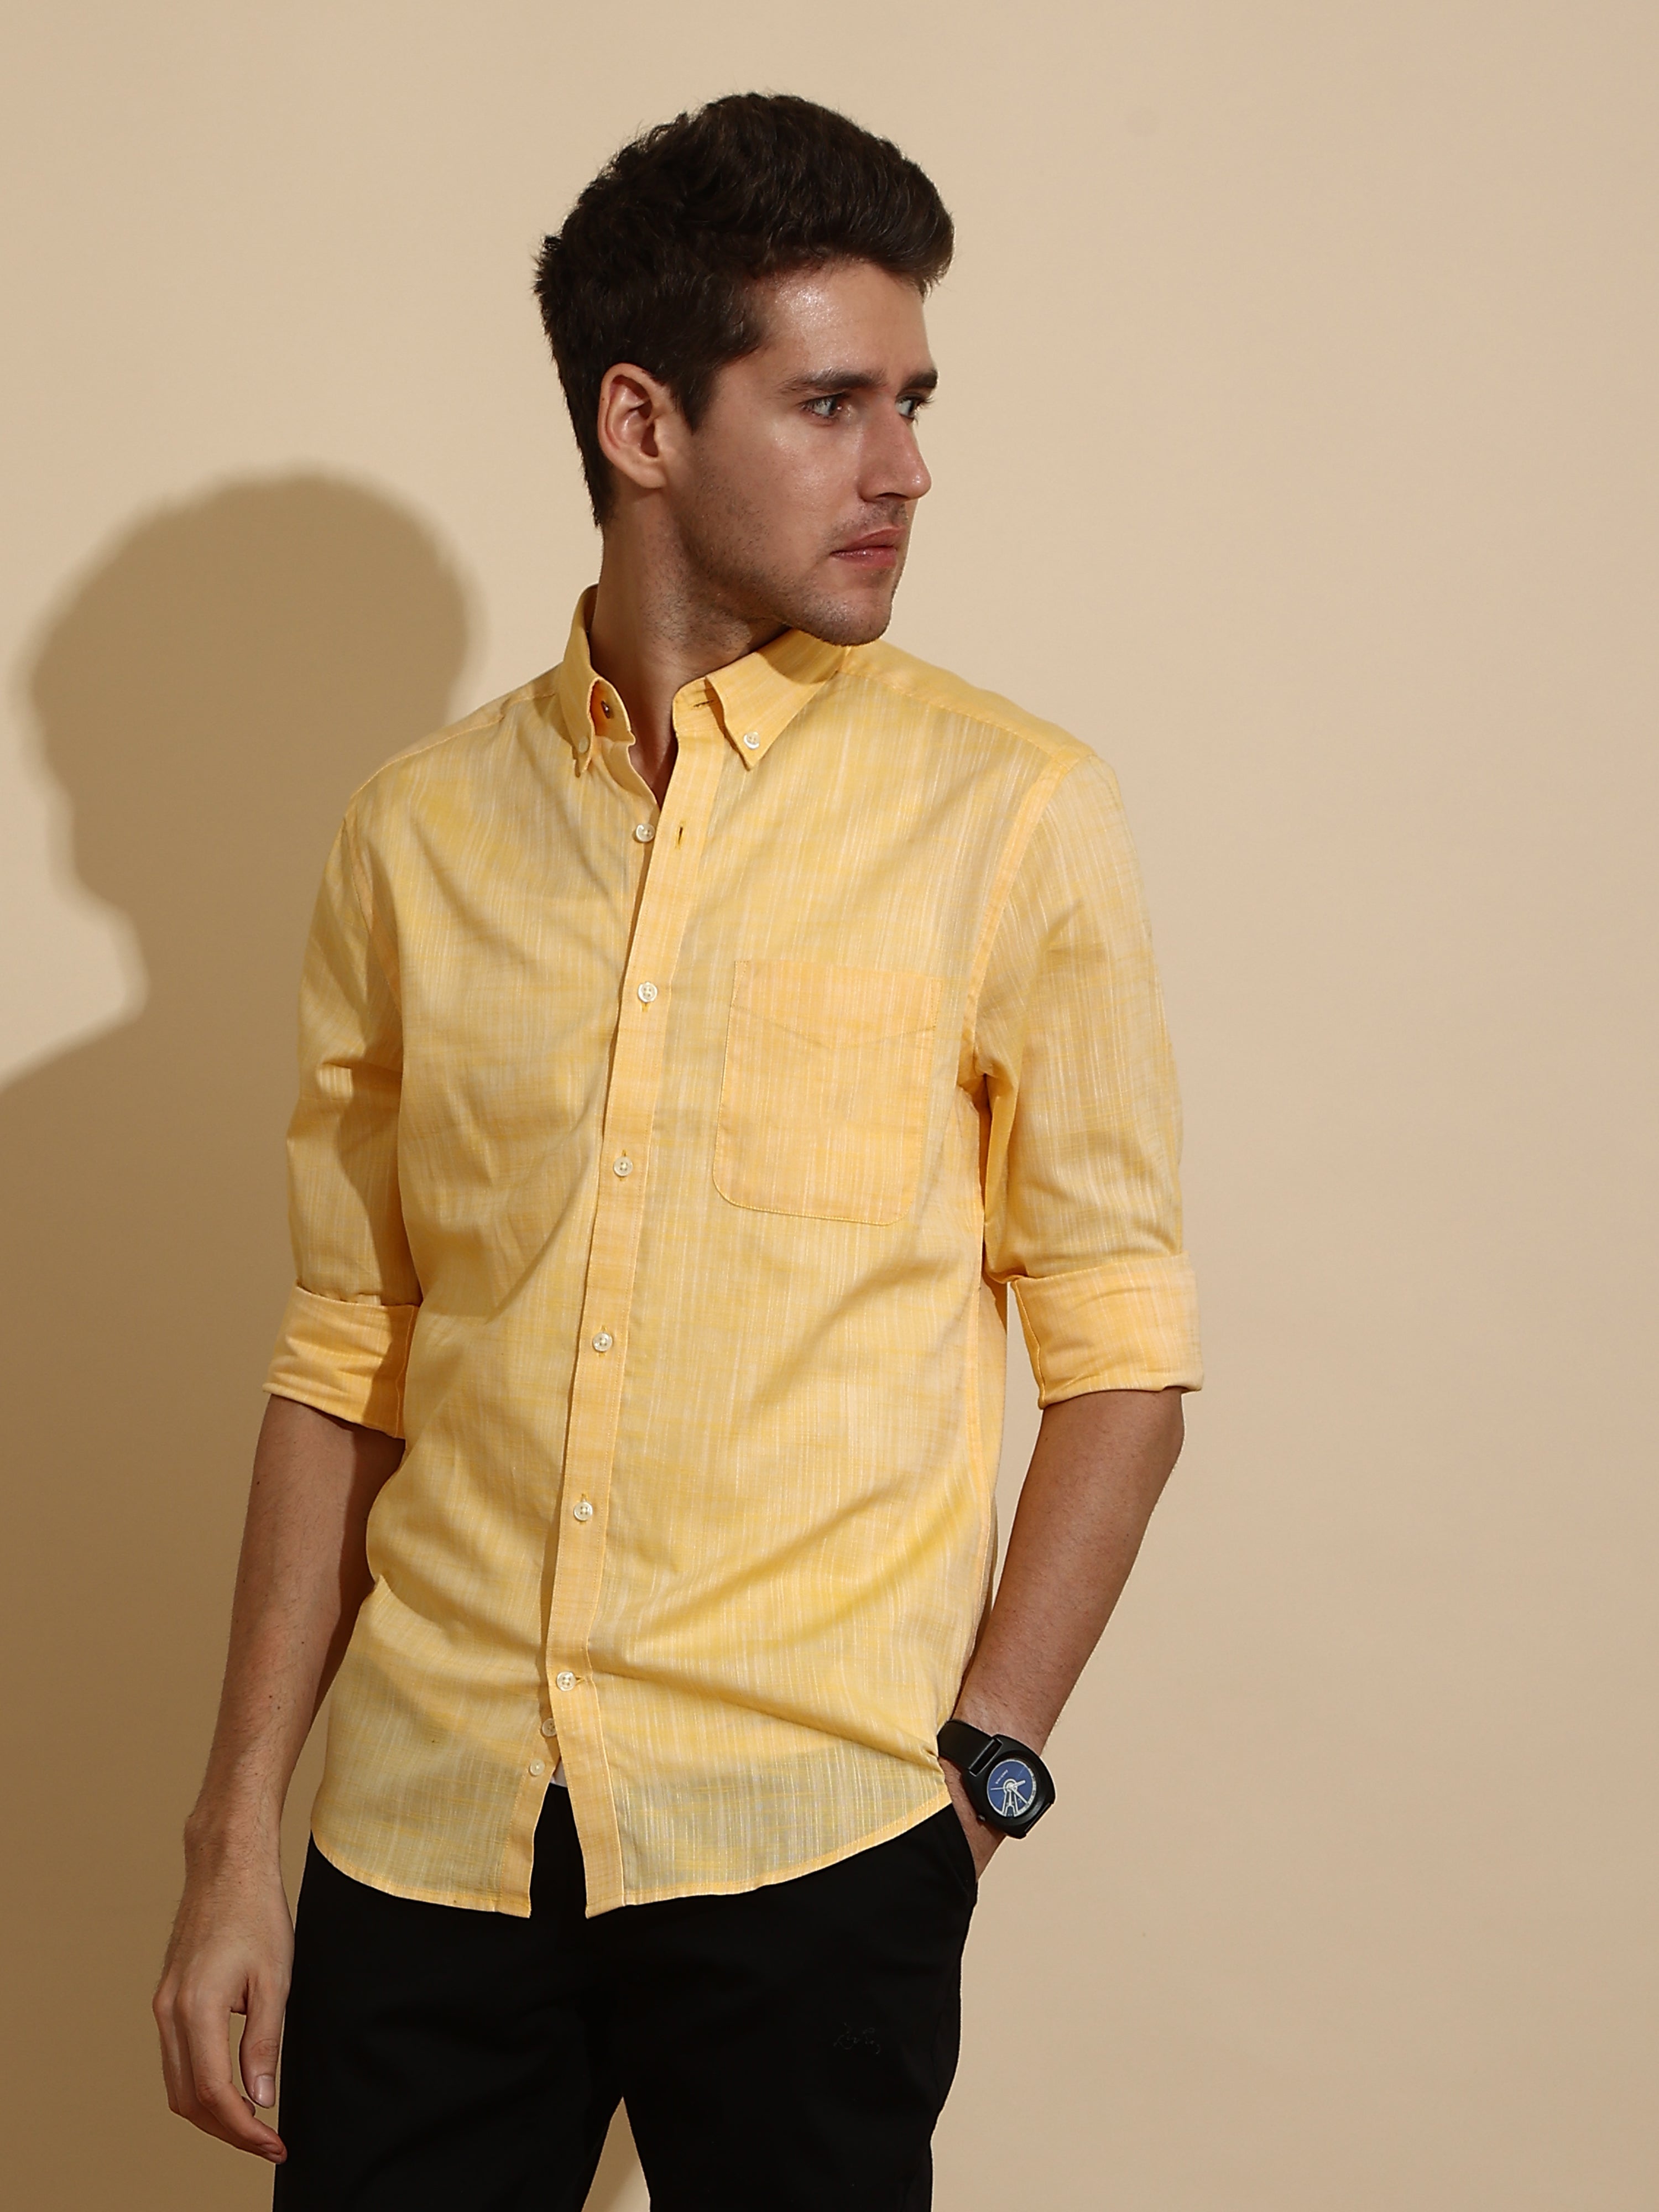 Mango Yellow Semi Casual Shirt shop online at Estilocus. • Full-sleeve solid shirt• Cut and sew placket• Regular collar• Double button square cuff.• Single pocket with logo embroidery• Curved hemline• Finest quality sewing• Machine wash care• Suitable to